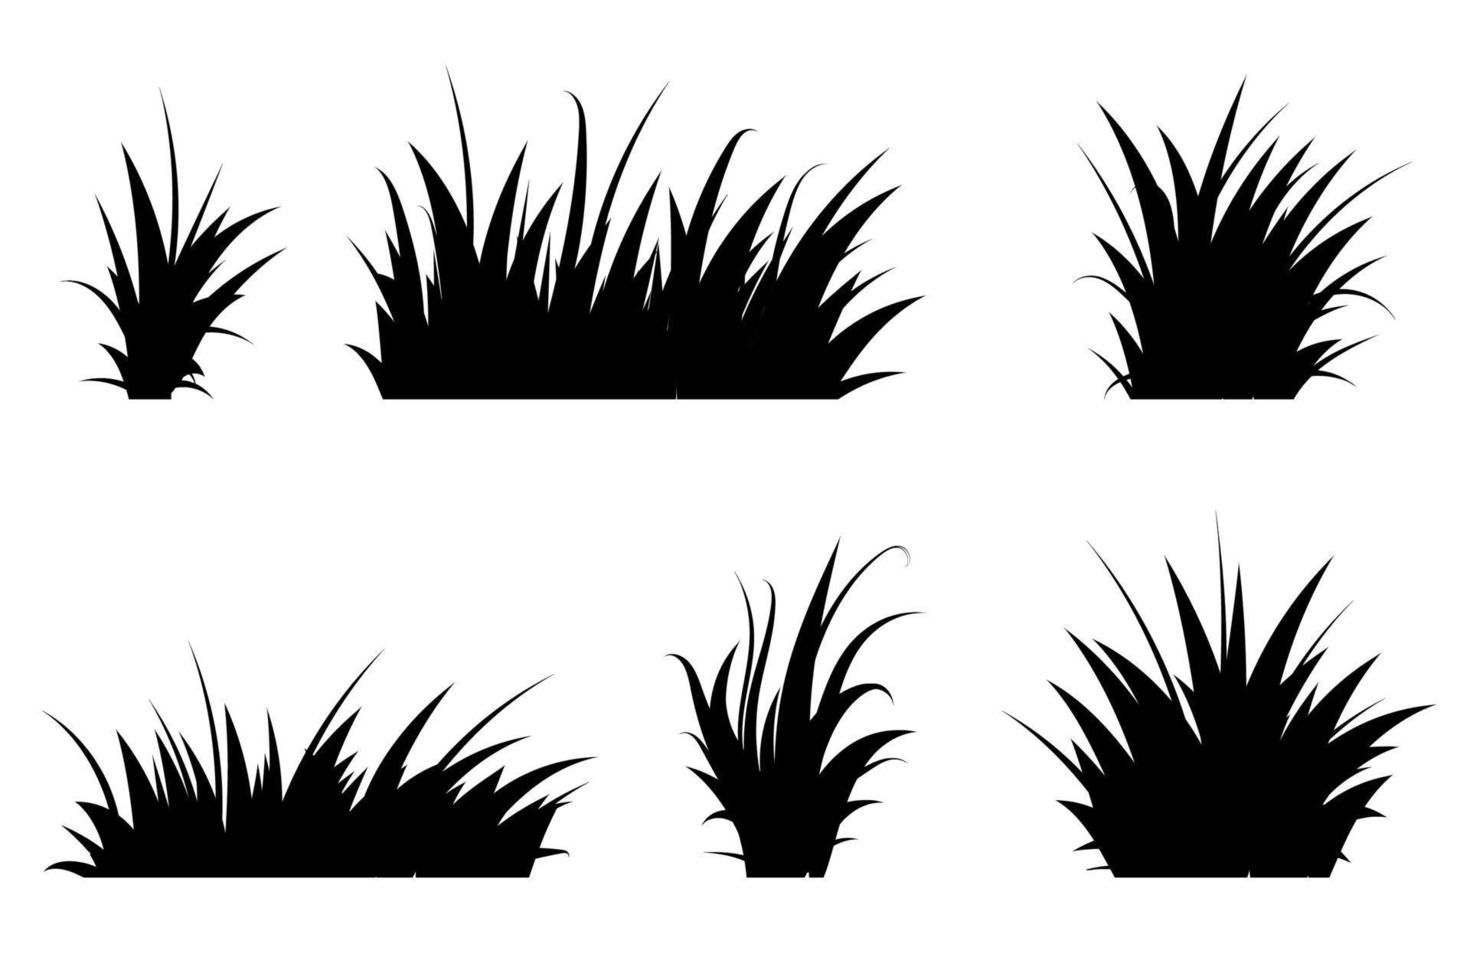 Set of black grass. Grass bushes of different shapes. Hand drawn grass. Grass silhouettes. Vector illustration